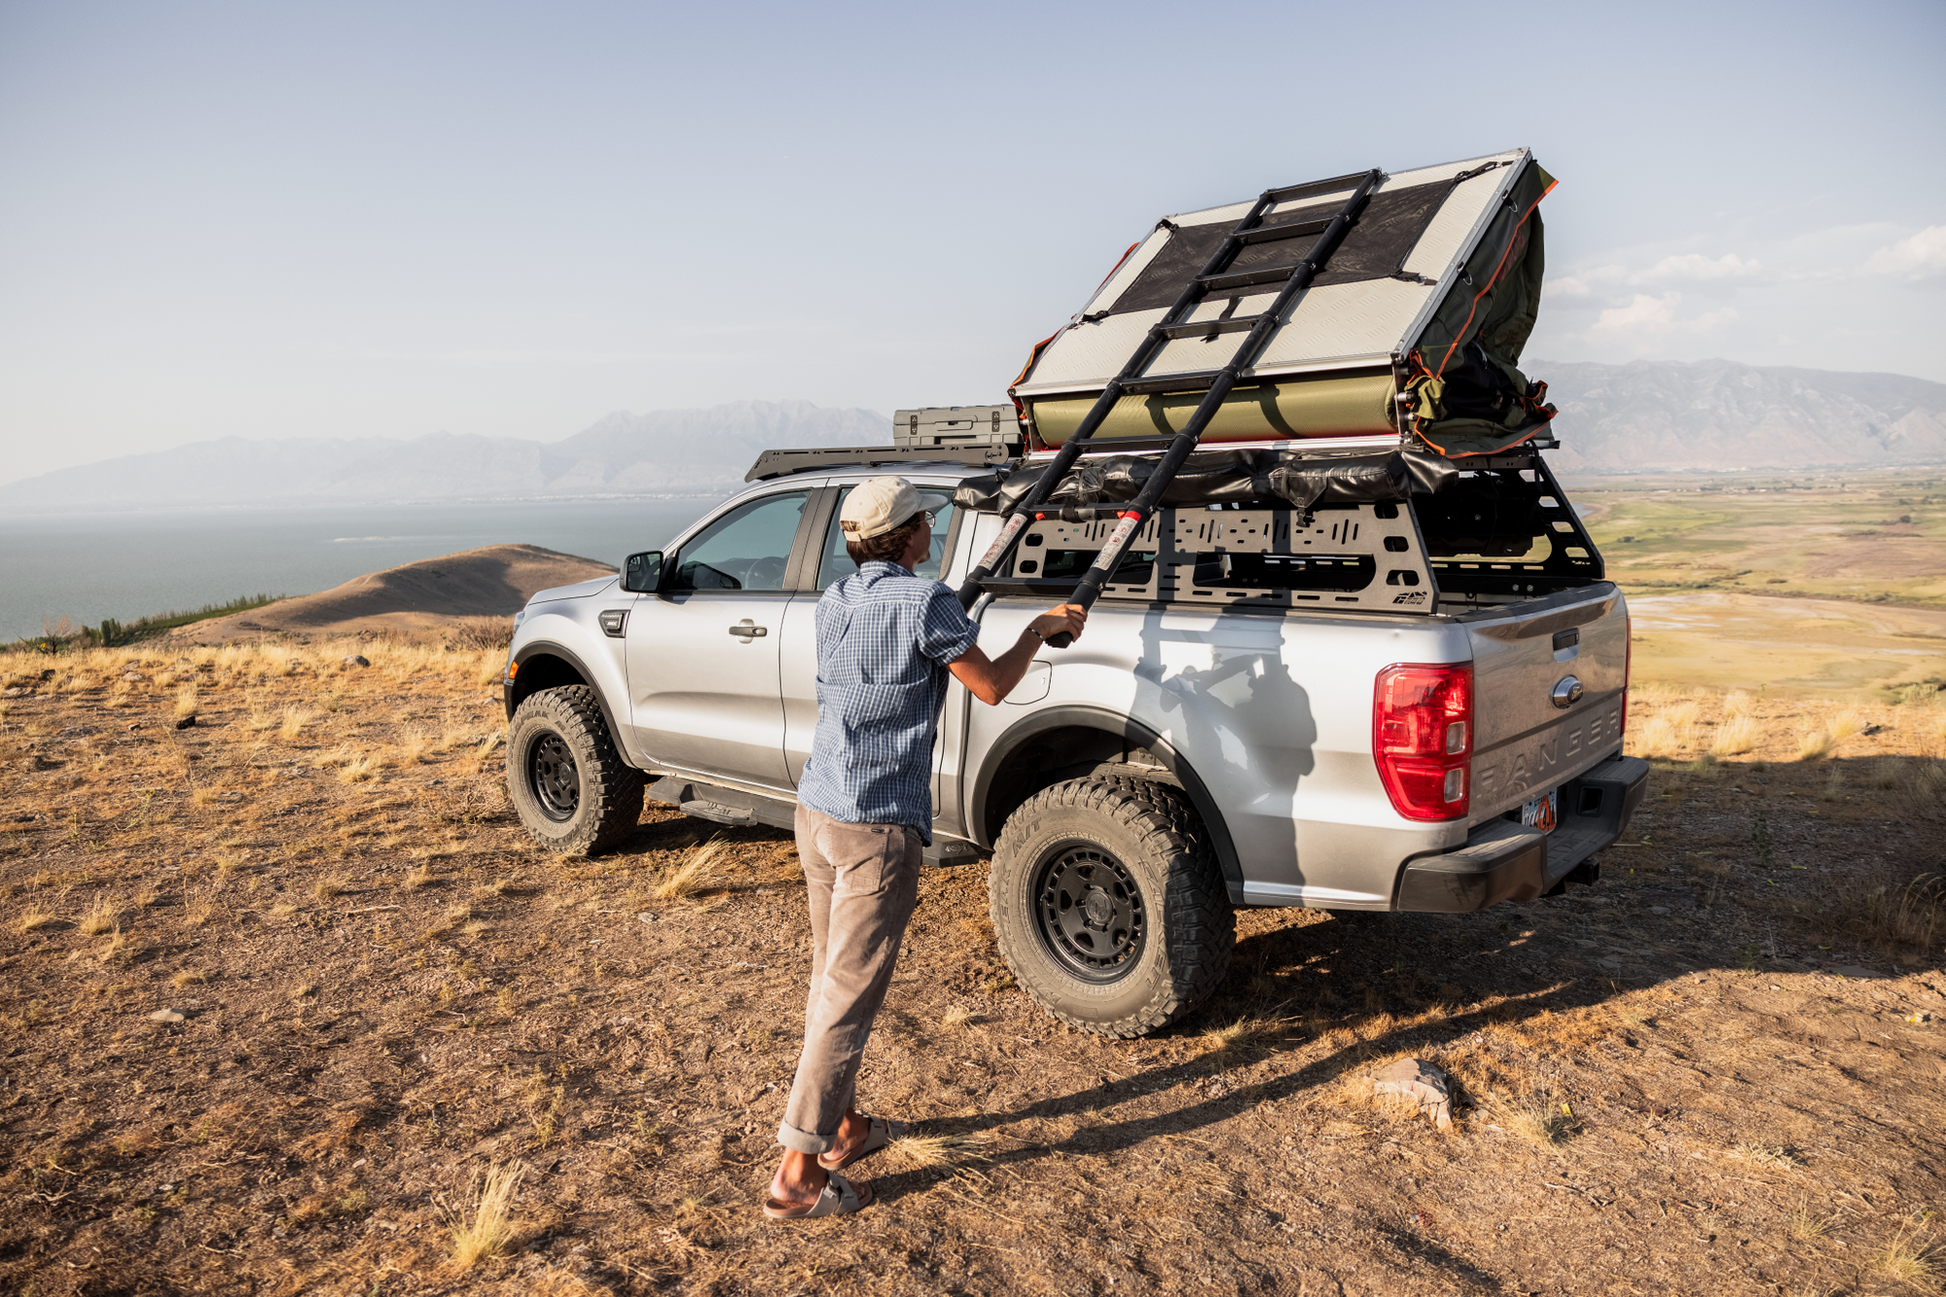 THE VAGABOND ROOFTOP TENT - BaseCamp Provisions